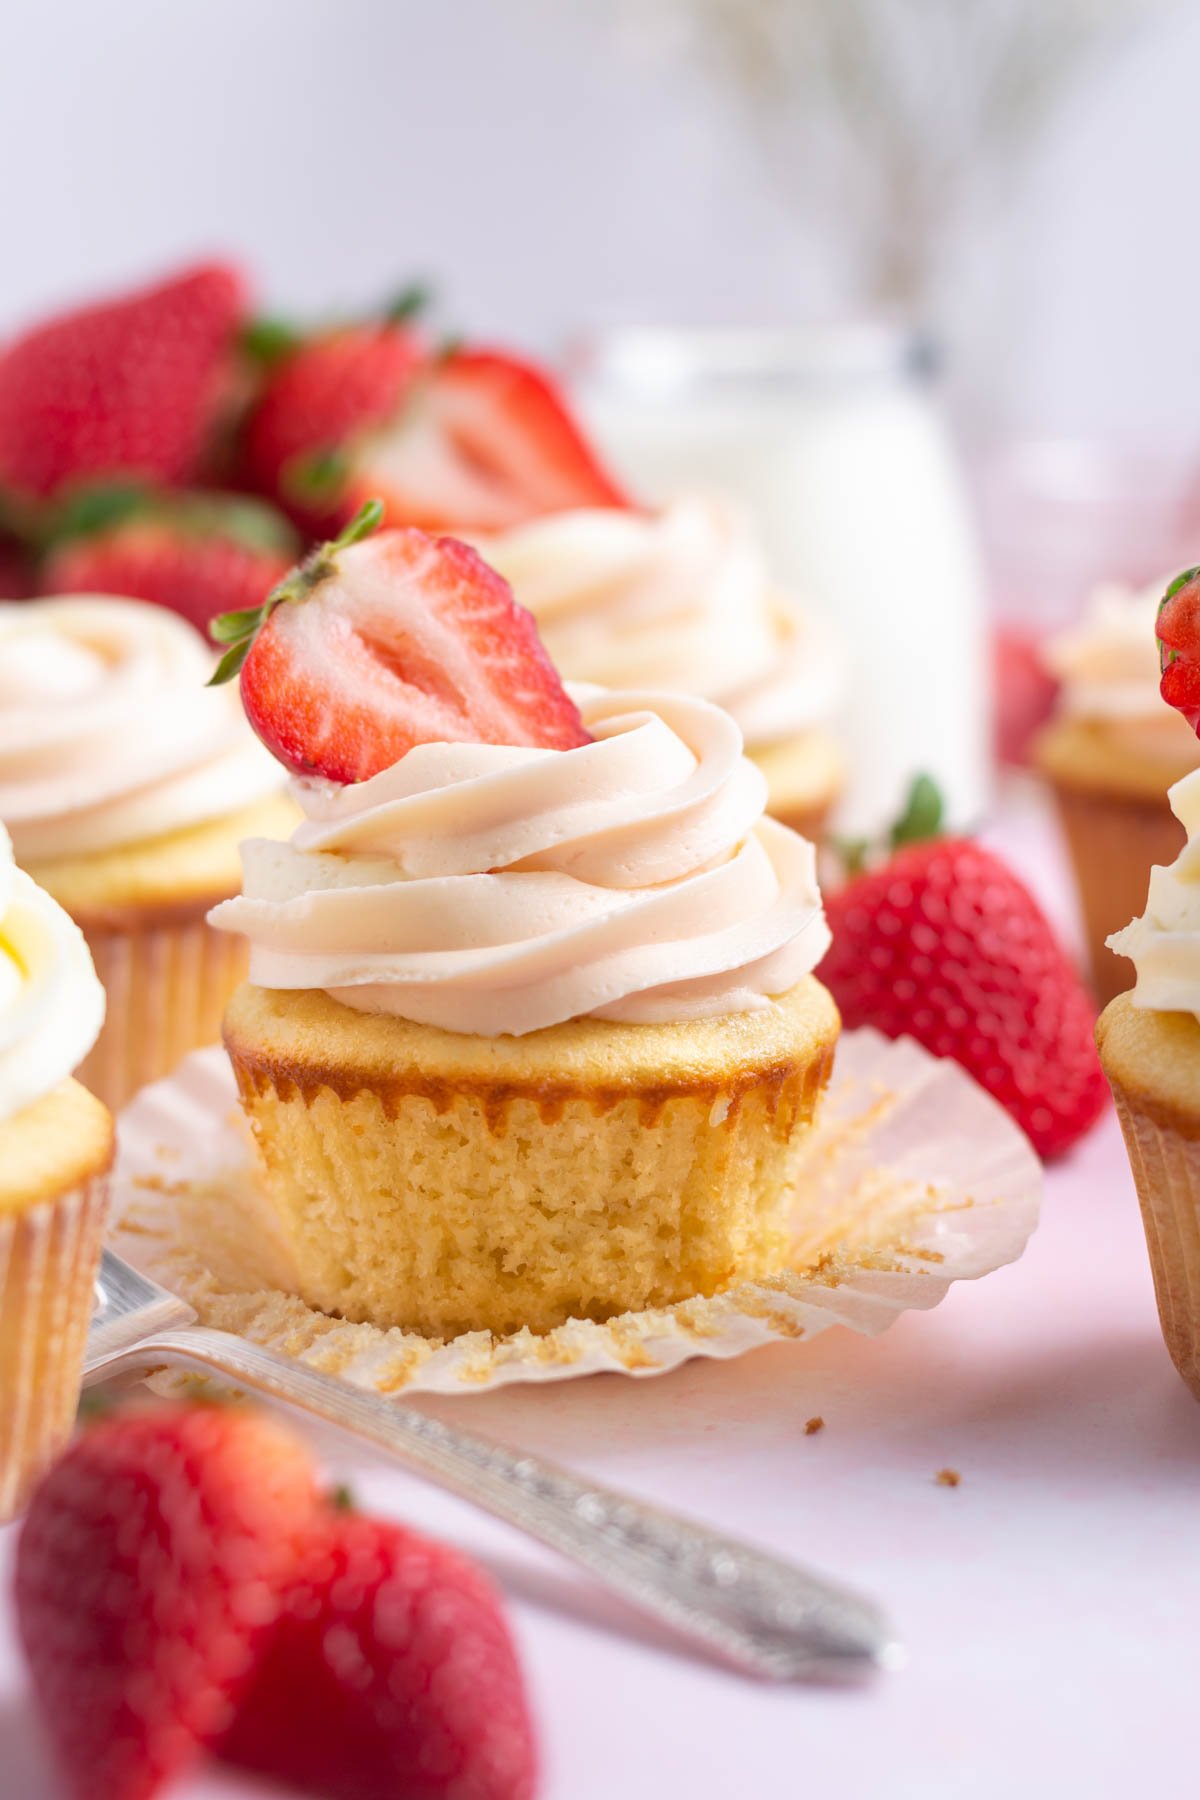 Strawberry filled cupcakes with fresh strawberries.